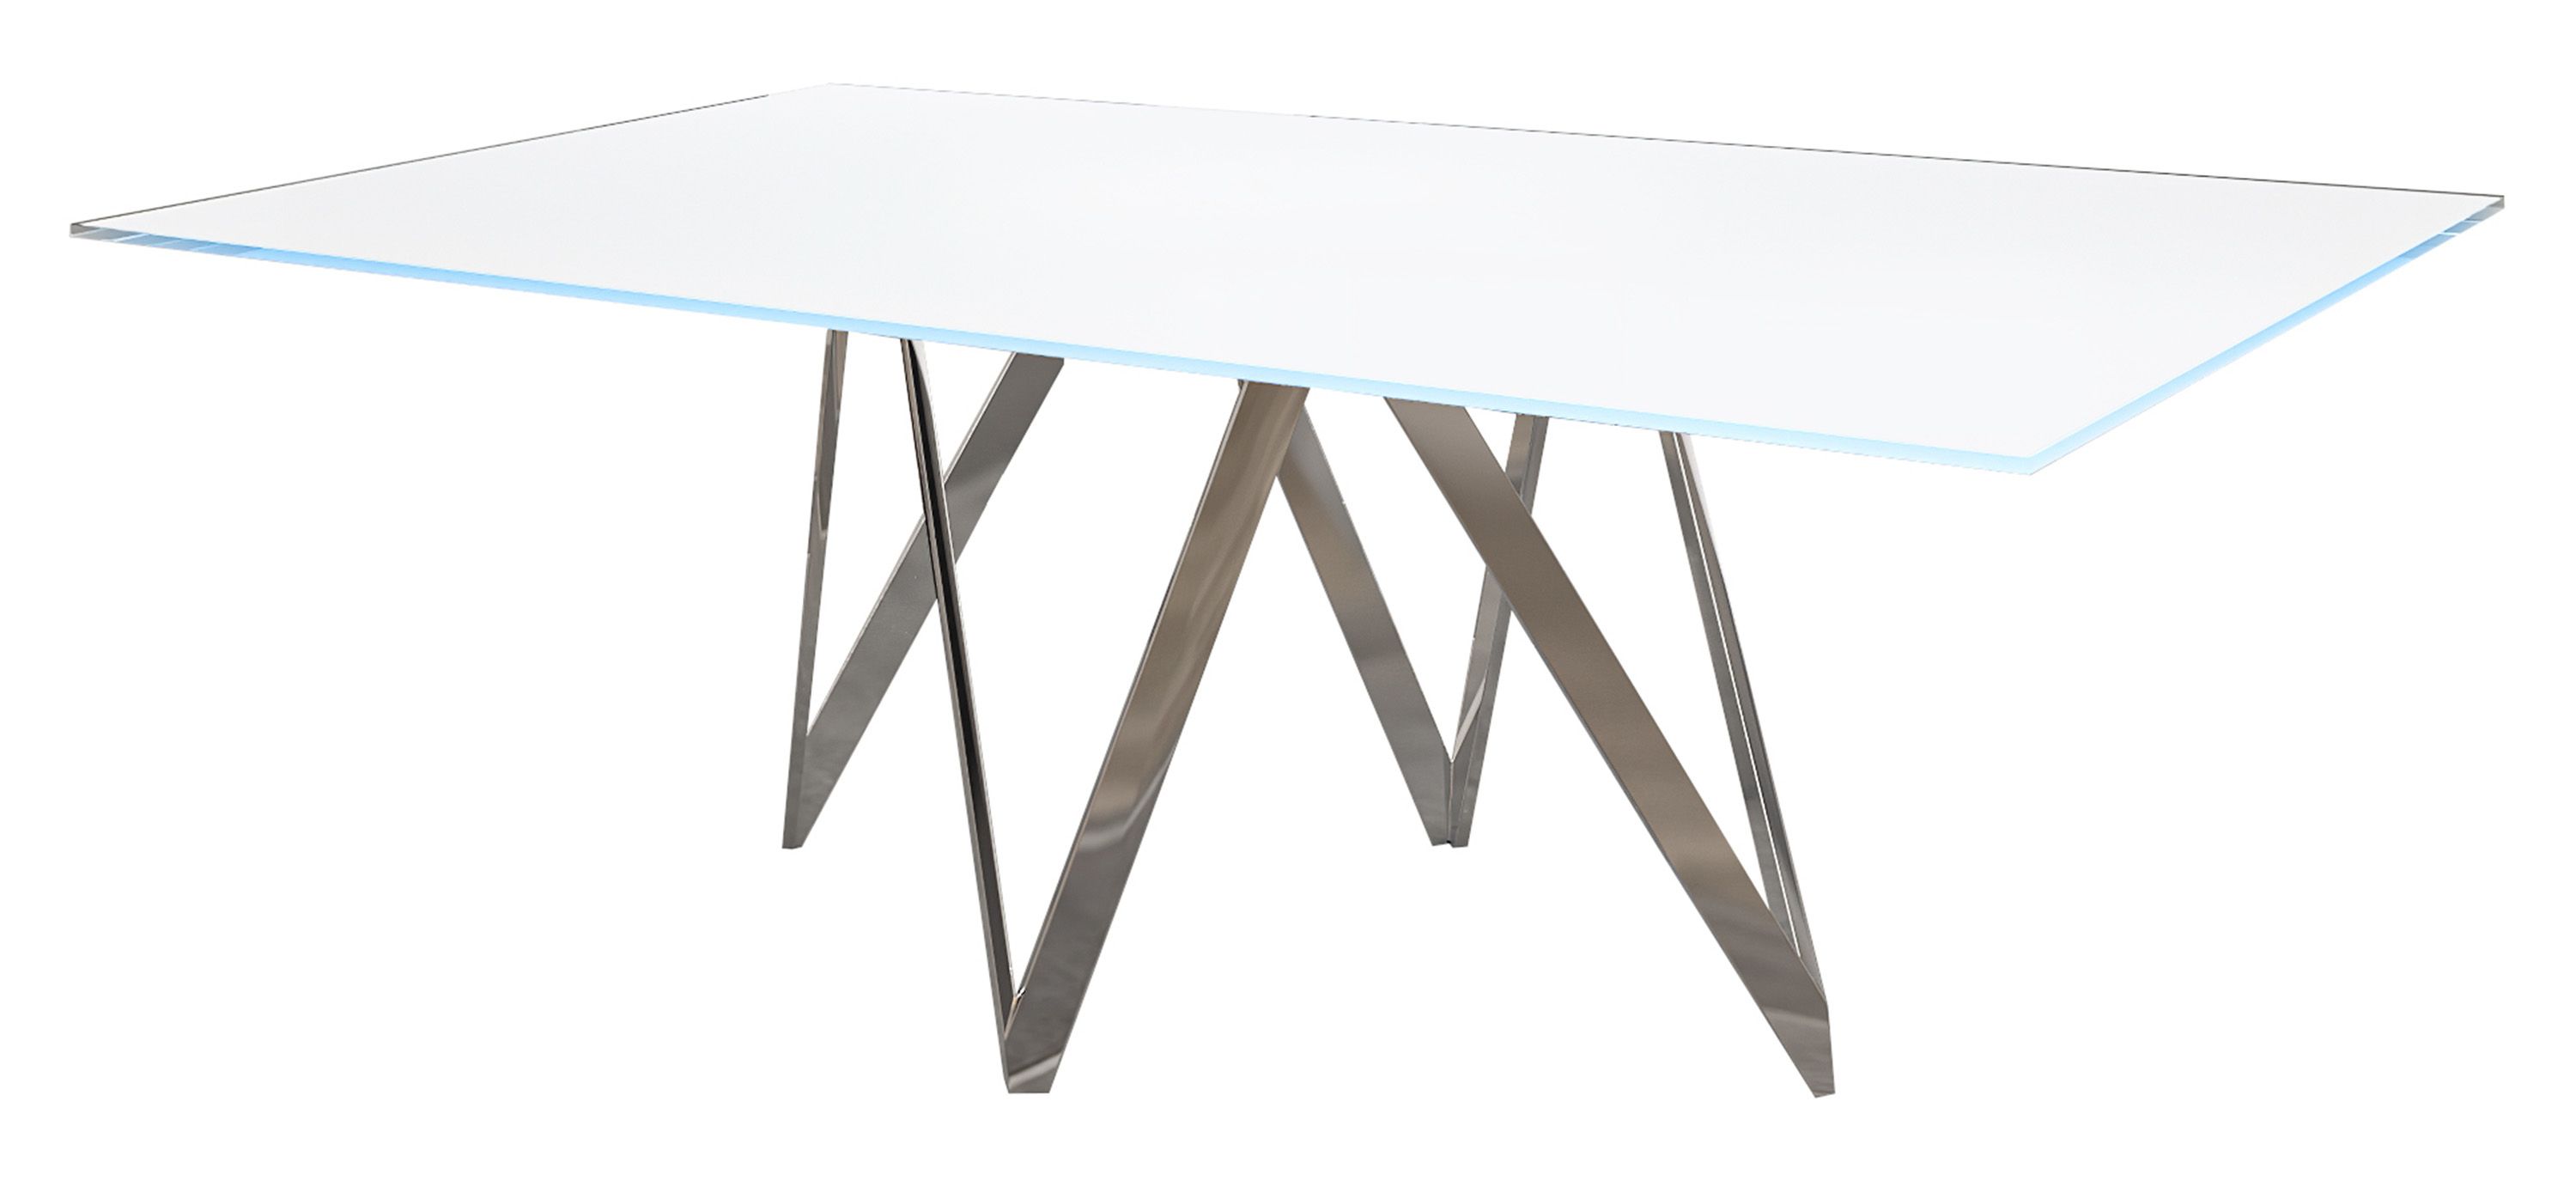 Abigail Dining Table